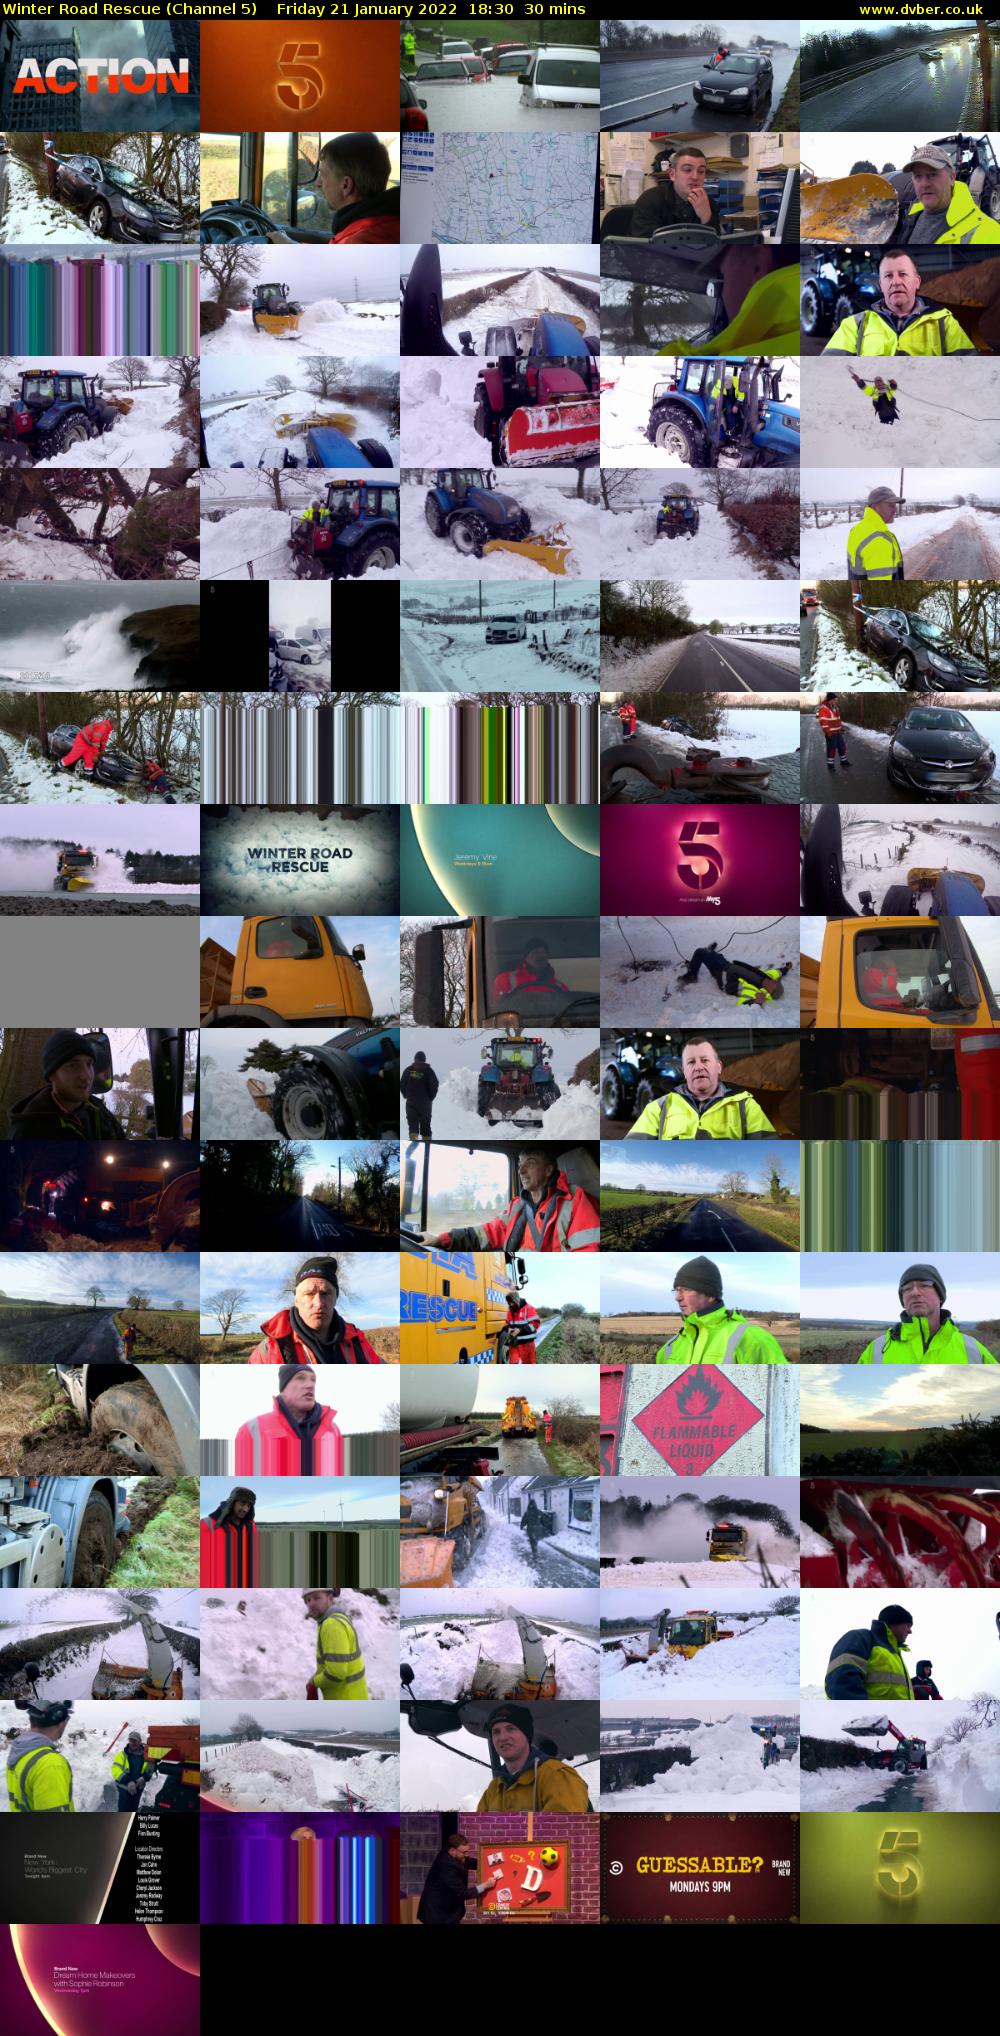 Winter Road Rescue (Channel 5) Friday 21 January 2022 18:30 - 19:00